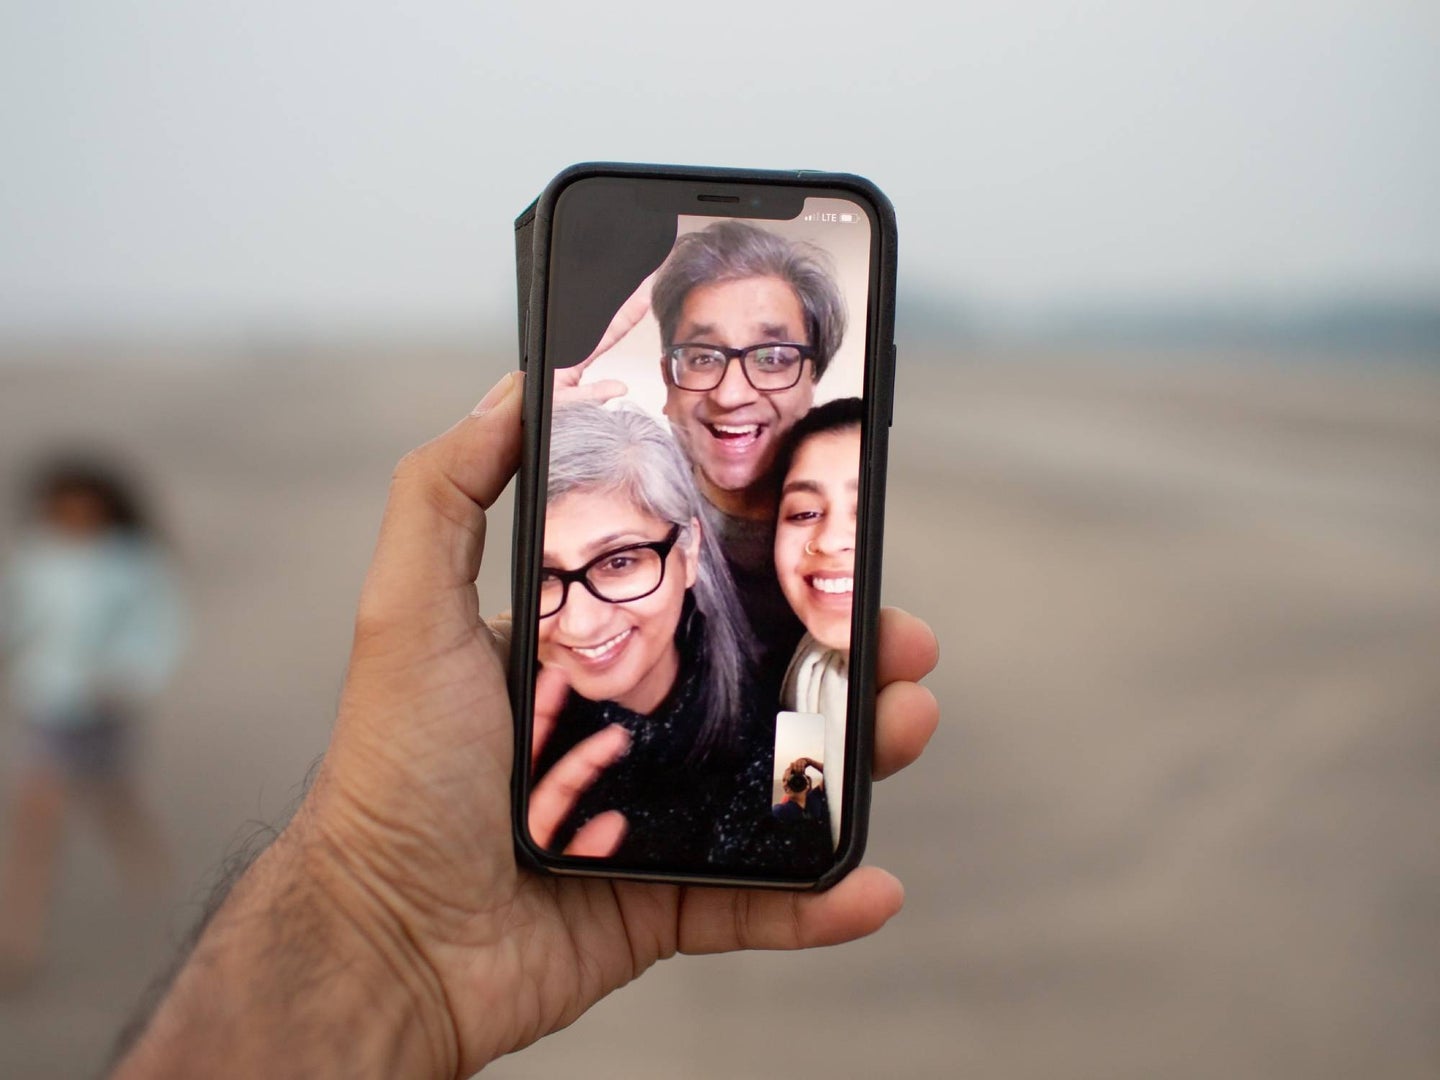 Video calls are not as great as actually seeing your family, so make the best out of them.